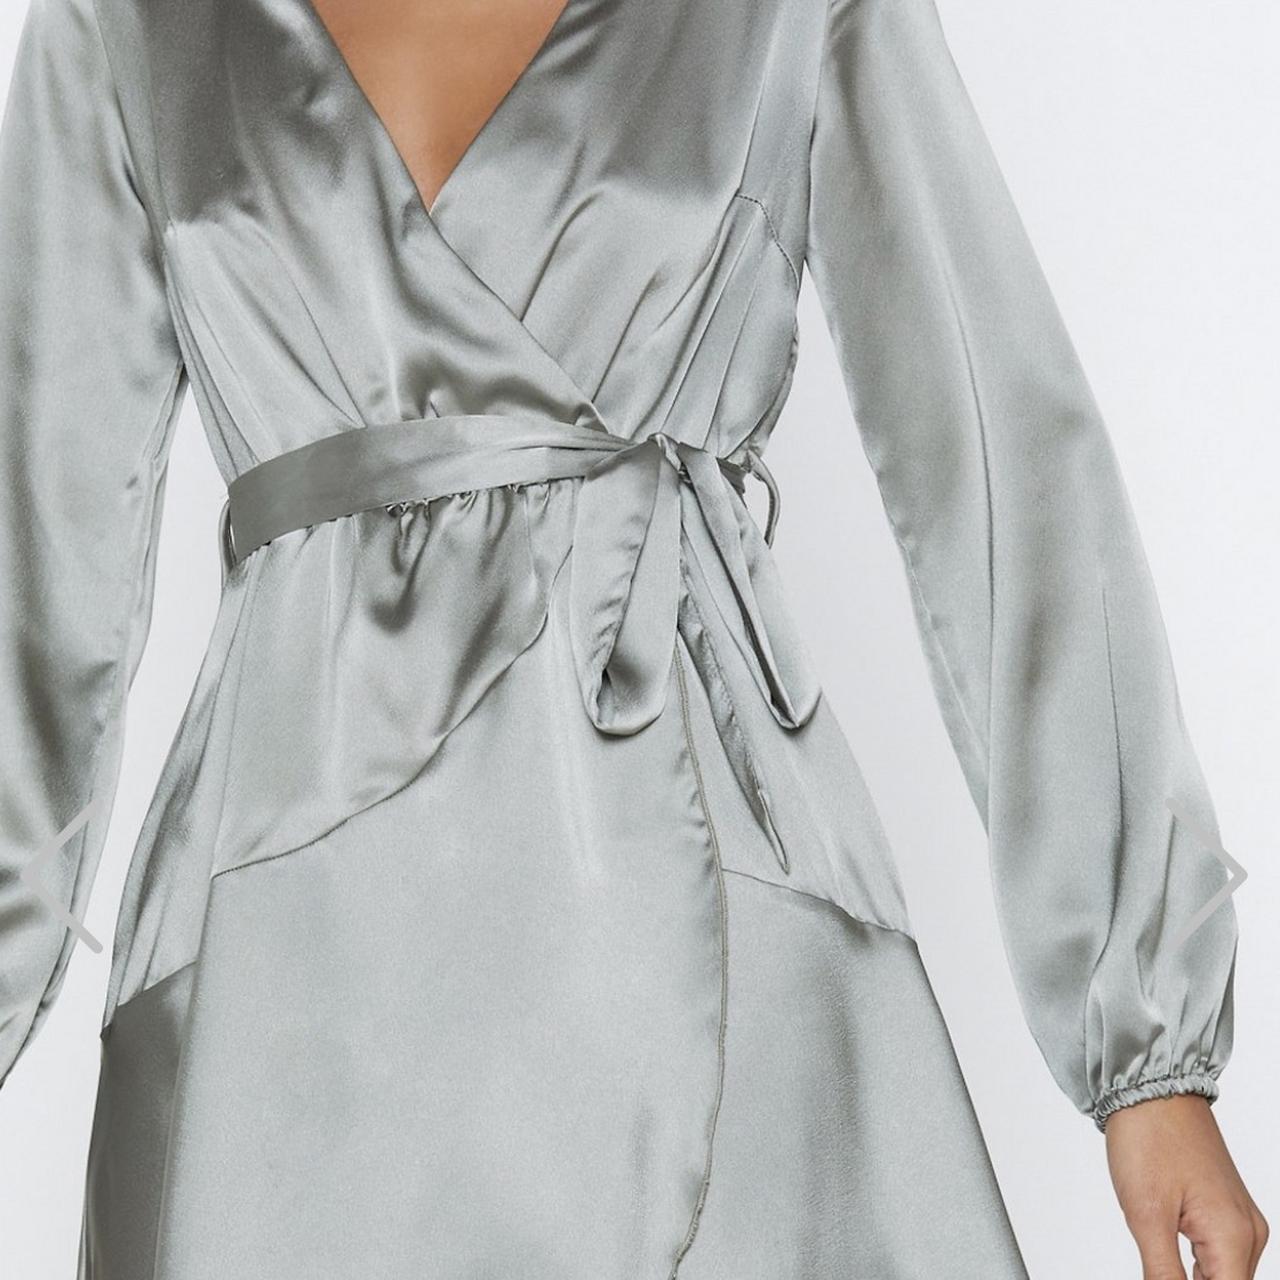 Nasty Gal - Sage/Silver Toned Satin Wrap Dress 
</p>
<div class='sfsiaftrpstwpr'><div class='sfsi_responsive_icons' style='display:block;margin-top:10px; margin-bottom: 10px; width:100%' data-icon-width-type='Fully responsive' data-icon-width-size='240' data-edge-type='Round' data-edge-radius='5'  ><div class='sfsi_icons_container sfsi_responsive_without_counter_icons sfsi_medium_button_container sfsi_icons_container_box_fully_container ' style='width:100%;display:flex; text-align:center;' ><a target='_blank' href='https://www.facebook.com/sharer/sharer.php?u=https%3A%2F%2Fwww.dresses2022.com%2Fnasty-gal-satin-wrap-dress%2F' style='display:block;text-align:center;margin-left:10px;  flex-basis:100%;' class=sfsi_responsive_fluid ><div class='sfsi_responsive_icon_item_container sfsi_responsive_icon_facebook_container sfsi_medium_button sfsi_responsive_icon_gradient sfsi_centered_icon' style=' border-radius:5px; width:auto; ' ><img style='max-height: 25px;display:unset;margin:0' class='sfsi_wicon' alt='facebook' src='https://www.dresses2022.com/wp-content/plugins/ultimate-social-media-icons/images/responsive-icon/facebook.svg'><span style='color:#fff'>Share on Facebook</span></div></a><a target='_blank' href='https://twitter.com/intent/tweet?text=Hey%2C+check+out+this+cool+site+I+found%3A+www.yourname.com+%23Topic+via%40my_twitter_name&url=https%3A%2F%2Fwww.dresses2022.com%2Fnasty-gal-satin-wrap-dress%2F' style='display:block;text-align:center;margin-left:10px;  flex-basis:100%;' class=sfsi_responsive_fluid ><div class='sfsi_responsive_icon_item_container sfsi_responsive_icon_twitter_container sfsi_medium_button sfsi_responsive_icon_gradient sfsi_centered_icon' style=' border-radius:5px; width:auto; ' ><img style='max-height: 25px;display:unset;margin:0' class='sfsi_wicon' alt='Twitter' src='https://www.dresses2022.com/wp-content/plugins/ultimate-social-media-icons/images/responsive-icon/Twitter.svg'><span style='color:#fff'>Tweet</span></div></a><a target='_blank' href='https://follow.it/now' style='display:block;text-align:center;margin-left:10px;  flex-basis:100%;' class=sfsi_responsive_fluid ><div class='sfsi_responsive_icon_item_container sfsi_responsive_icon_follow_container sfsi_medium_button sfsi_responsive_icon_gradient sfsi_centered_icon' style=' border-radius:5px; width:auto; ' ><img style='max-height: 25px;display:unset;margin:0' class='sfsi_wicon' alt='Follow' src='https://www.dresses2022.com/wp-content/plugins/ultimate-social-media-icons/images/responsive-icon/Follow.png'><span style='color:#fff'>Follow us</span></div></a><a target='_blank' href='https://www.pinterest.com/pin/create/link/?url=https%3A%2F%2Fwww.dresses2022.com%2Fnasty-gal-satin-wrap-dress%2F' style='display:block;text-align:center;margin-left:10px;  flex-basis:100%;' class=sfsi_responsive_fluid ><div class='sfsi_responsive_icon_item_container sfsi_responsive_icon_pinterest_container sfsi_medium_button sfsi_responsive_icon_gradient sfsi_centered_icon' style=' border-radius:5px; width:auto; ' ><img style='max-height: 25px;display:unset;margin:0' class='sfsi_wicon' alt='Pinterest' src='https://www.dresses2022.com/wp-content/plugins/ultimate-social-media-icons/images/responsive-icon/Pinterest.svg'><span style='color:#fff'>Save</span></div></a></div></div></div><!--end responsive_icons--><div class=